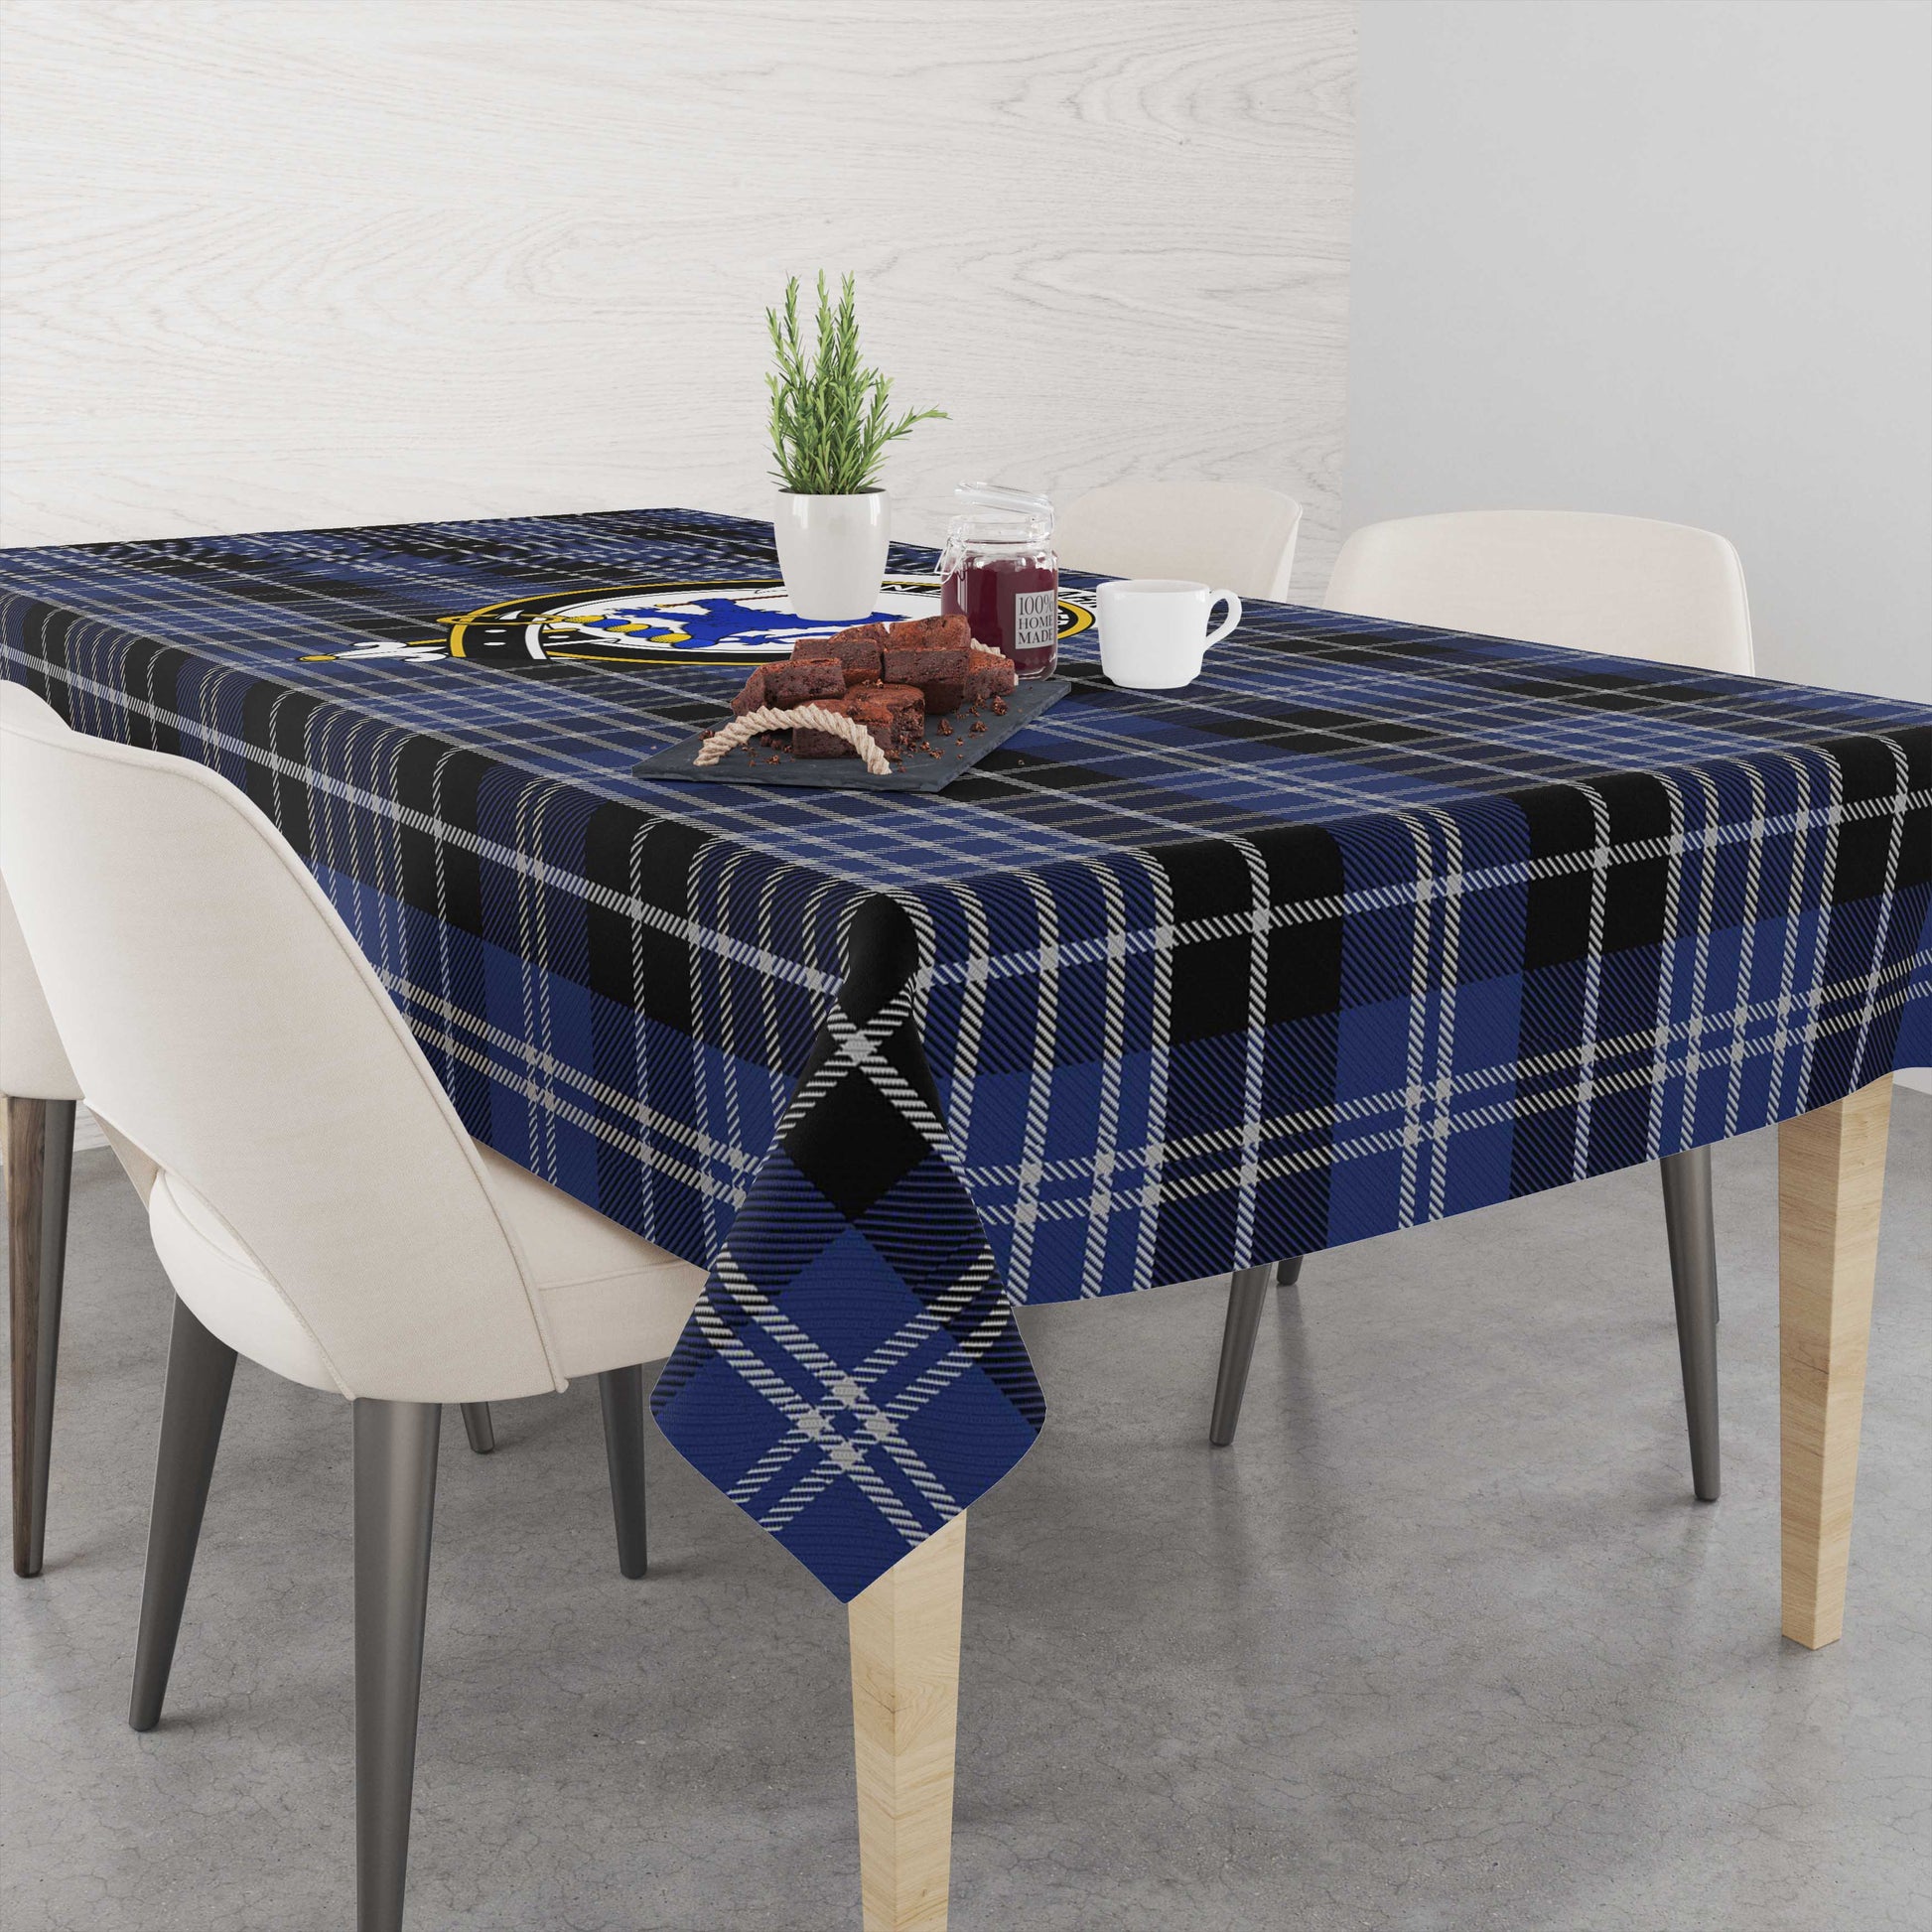 clark-lion-tatan-tablecloth-with-family-crest